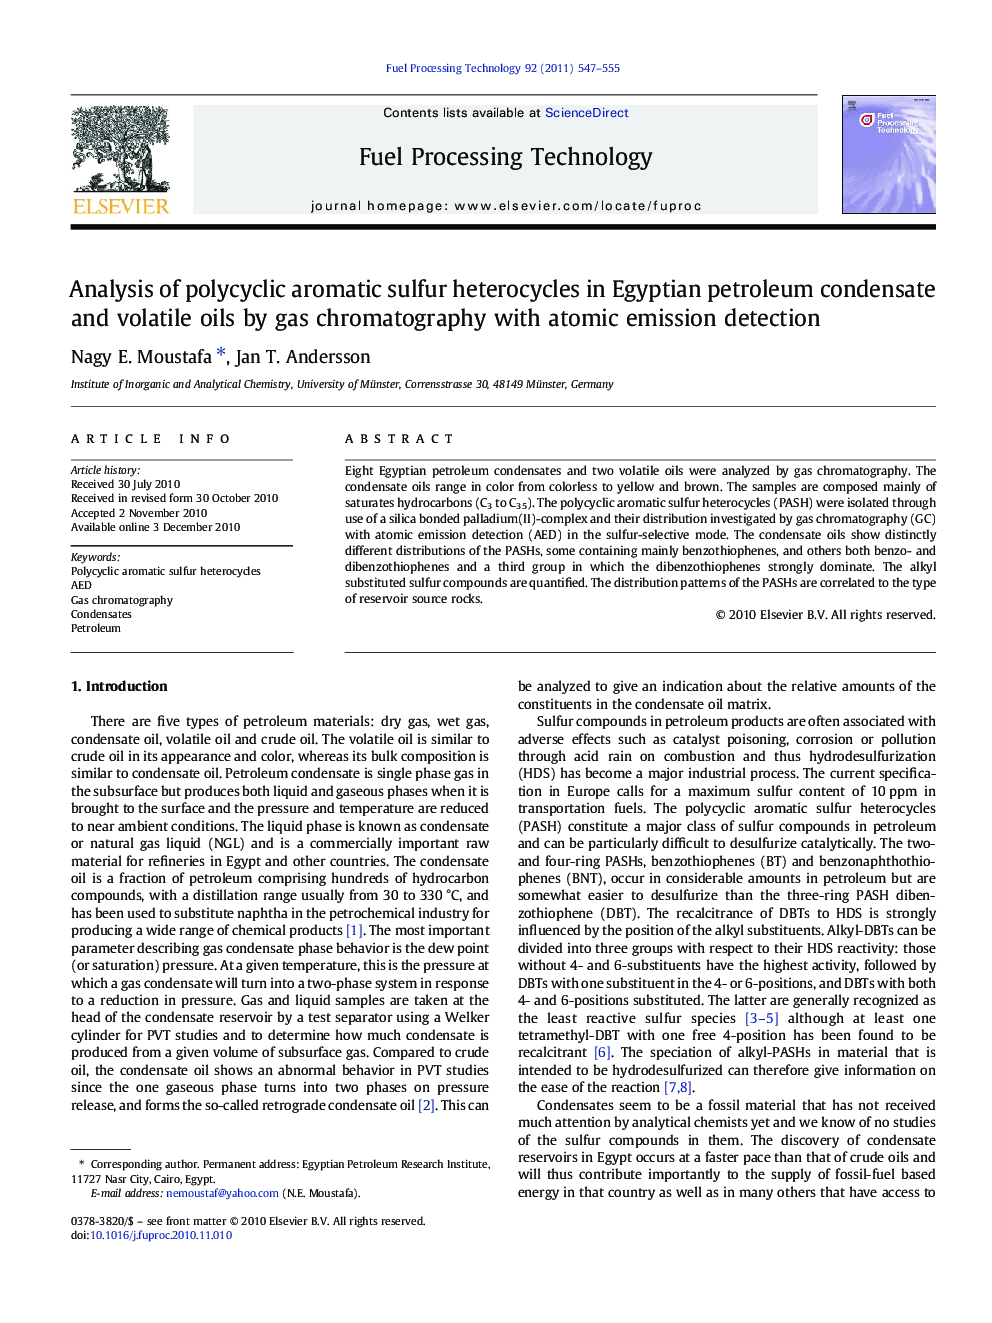 Analysis of polycyclic aromatic sulfur heterocycles in Egyptian petroleum condensate and volatile oils by gas chromatography with atomic emission detection